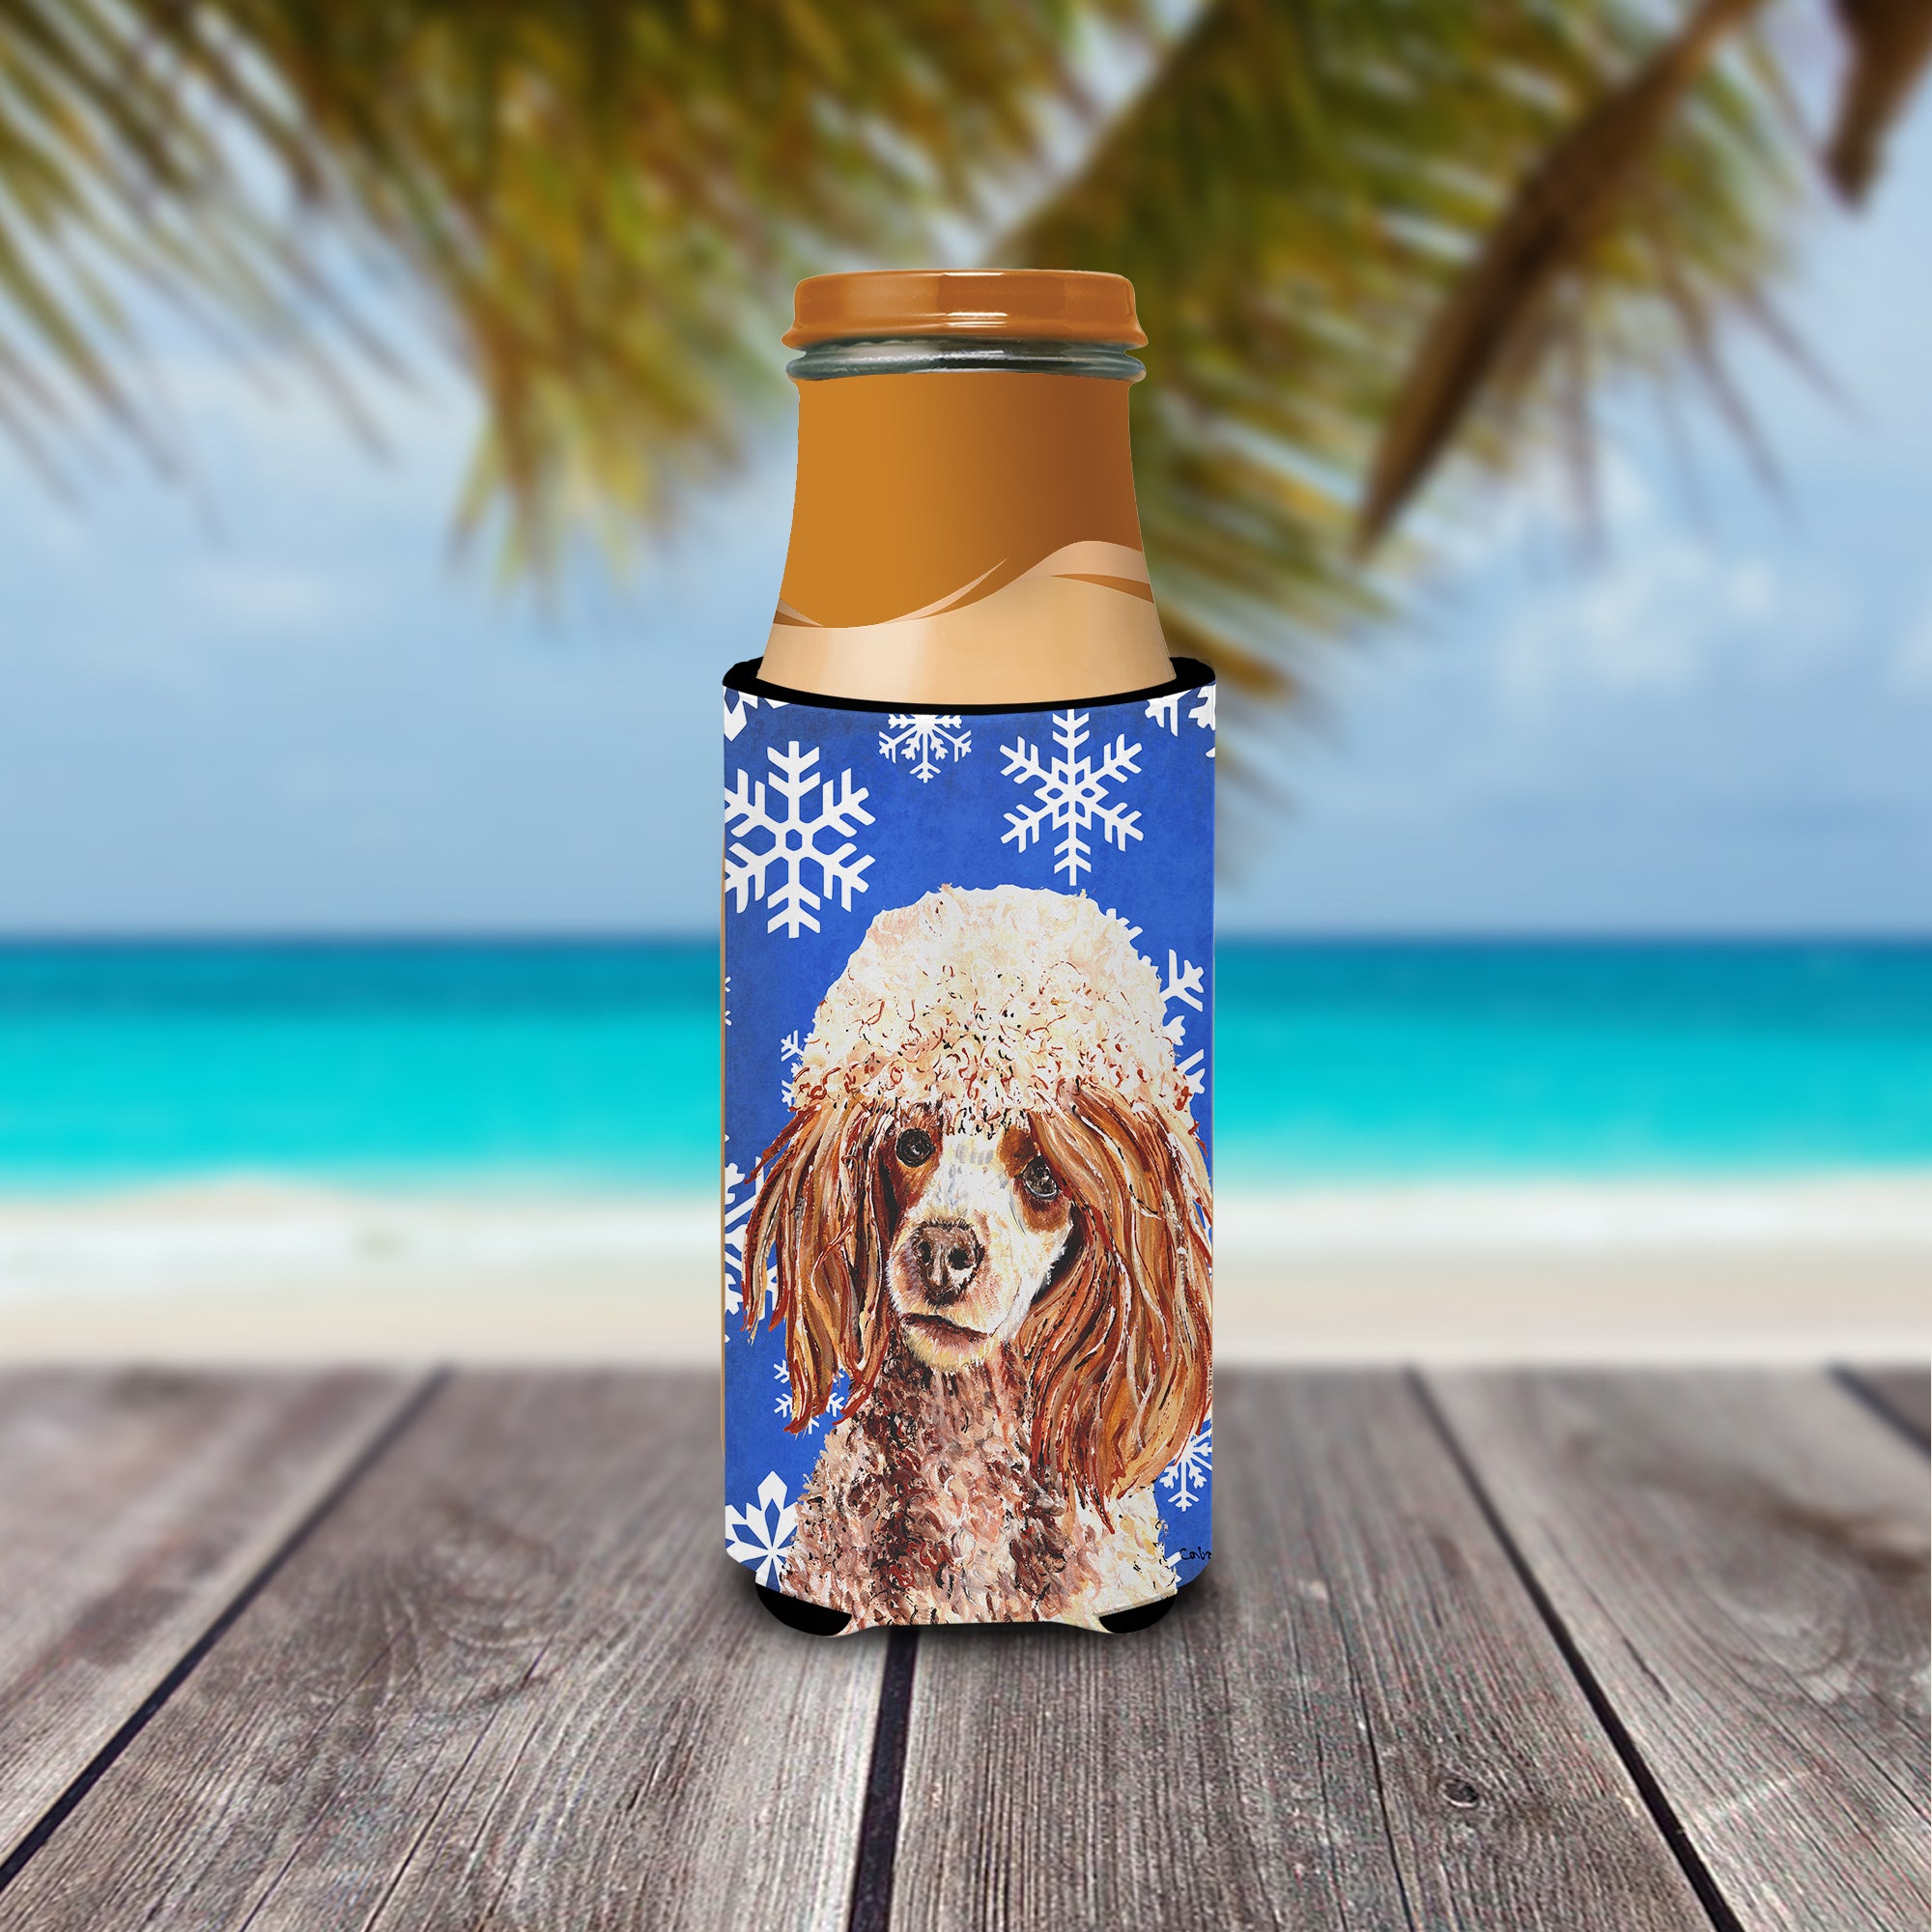 Red Miniature Poodle Winter Snowflakes Ultra Beverage Insulators for slim cans SC9771MUK